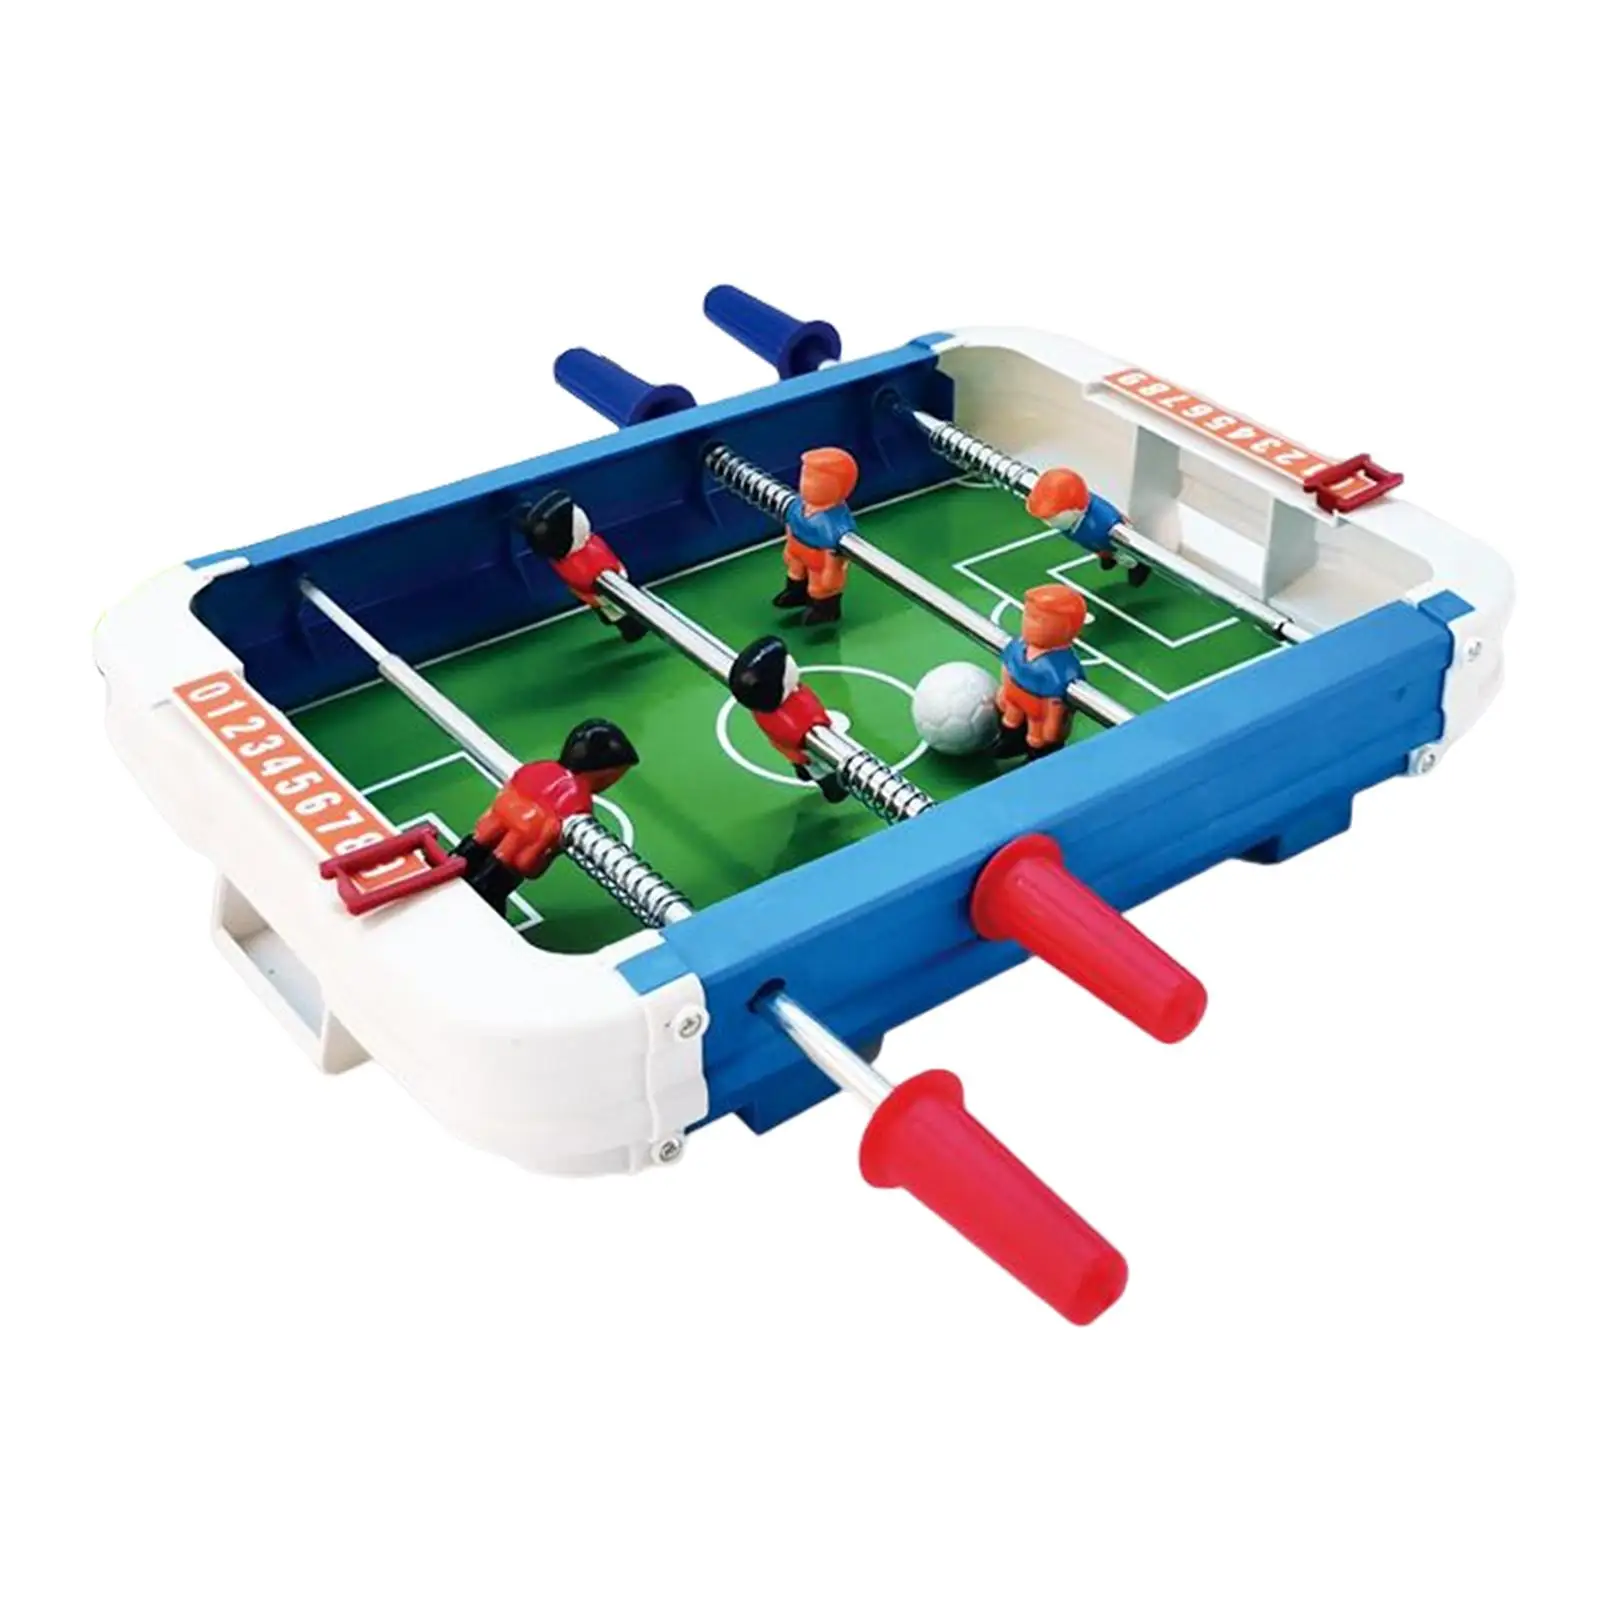 Foosball Table Football Game Desktop Sport Board for Holiday Gifts